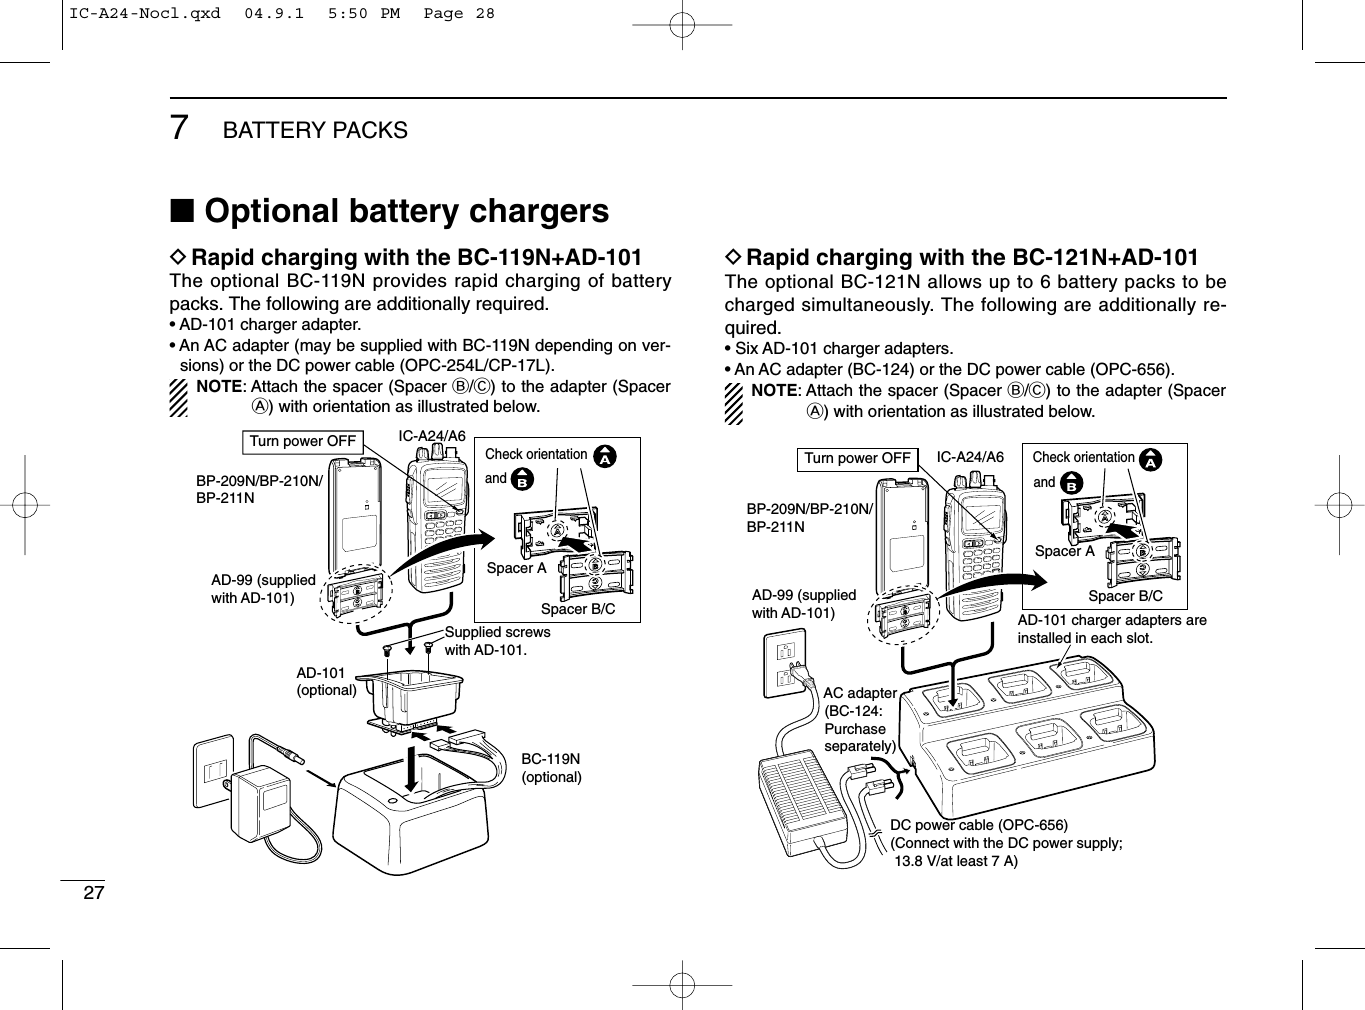 277BATTERY PACKS■Optional battery chargersDRapid charging with the BC-119N+AD-101The optional BC-119N provides rapid charging of batterypacks. The following are additionally required.• AD-101 charger adapter.• An AC adapter (may be supplied with BC-119N depending on ver-sions) or the DC power cable (OPC-254L/CP-17L).NOTE: Attach the spacer (Spacer B/C) to the adapter (SpacerA) with orientation as illustrated below.DRapid charging with the BC-121N+AD-101The optional BC-121N allows up to 6 battery packs to becharged simultaneously. The following are additionally re-quired.• Six AD-101 charger adapters.• An AC adapter (BC-124) or the DC power cable (OPC-656).NOTE: Attach the spacer (Spacer B/C) to the adapter (SpacerA) with orientation as illustrated below.AD-99 (suppliedwith AD-101)AD-101(optional)Supplied screwswith AD-101.BC-119N(optional)IC-A24/A6BP-209N/BP-210N/BP-211NTurn power OFFSpacer ASpacer B/CCheck orientationandIC-A24/A6BP-209N/BP-210N/BP-211N AC adapter (BC-124: Purchase separately)AD-101 charger adapters are installed in each slot.DC power cable (OPC-656)(Connect with the DC power supply;  13.8 V/at least 7 A)Turn power OFFAD-99 (supplied with AD-101)Spacer ASpacer B/CCheck orientationandIC-A24-Nocl.qxd  04.9.1  5:50 PM  Page 28